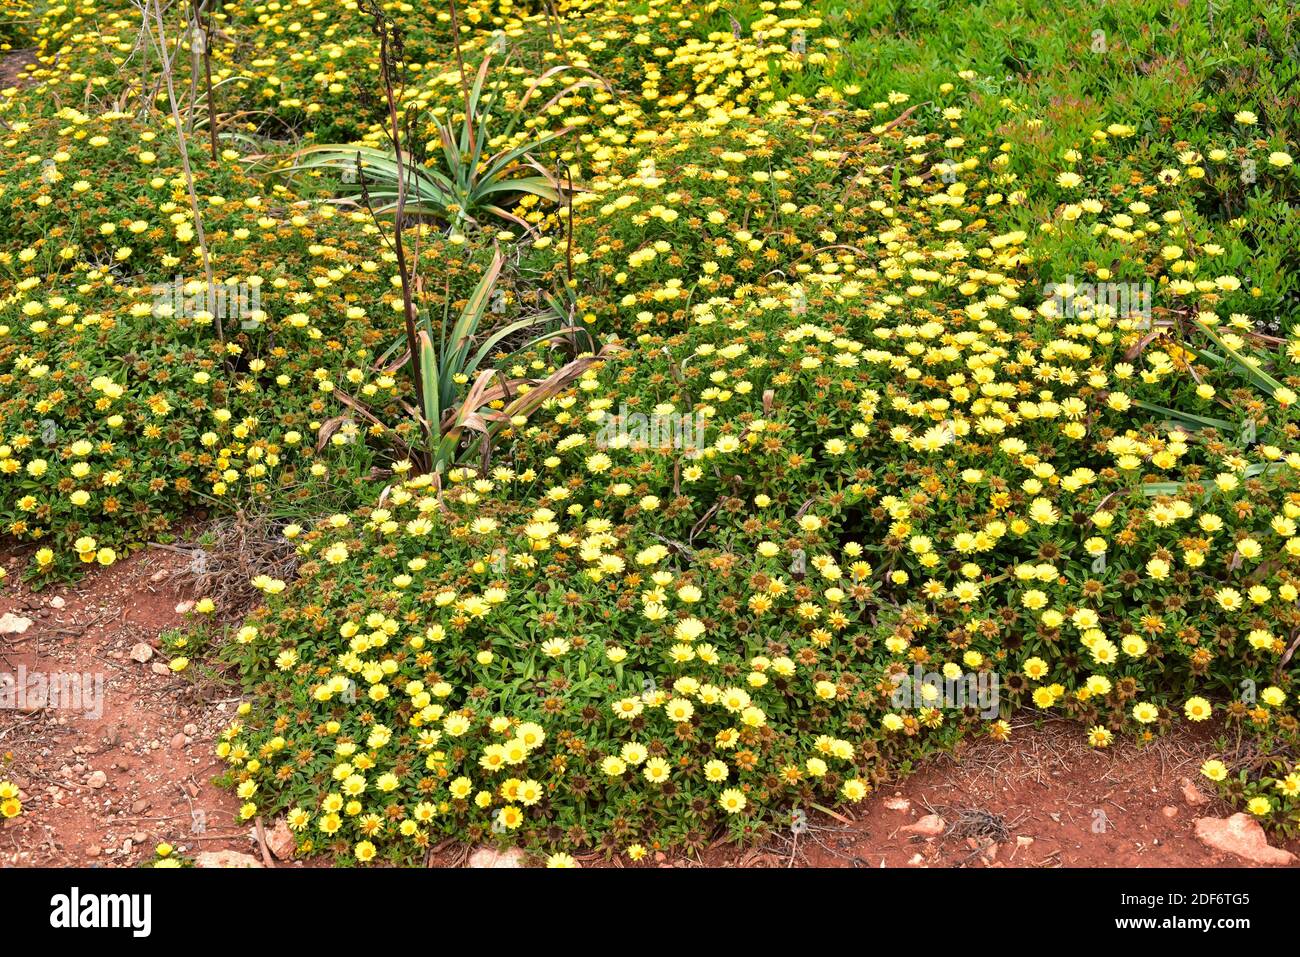 Gold coin daisy (Asteriscus maritimus or Pallenis maritima) is a perennial herb native to west Mediterranean coasts, Canary Islands and Greece. This Stock Photo